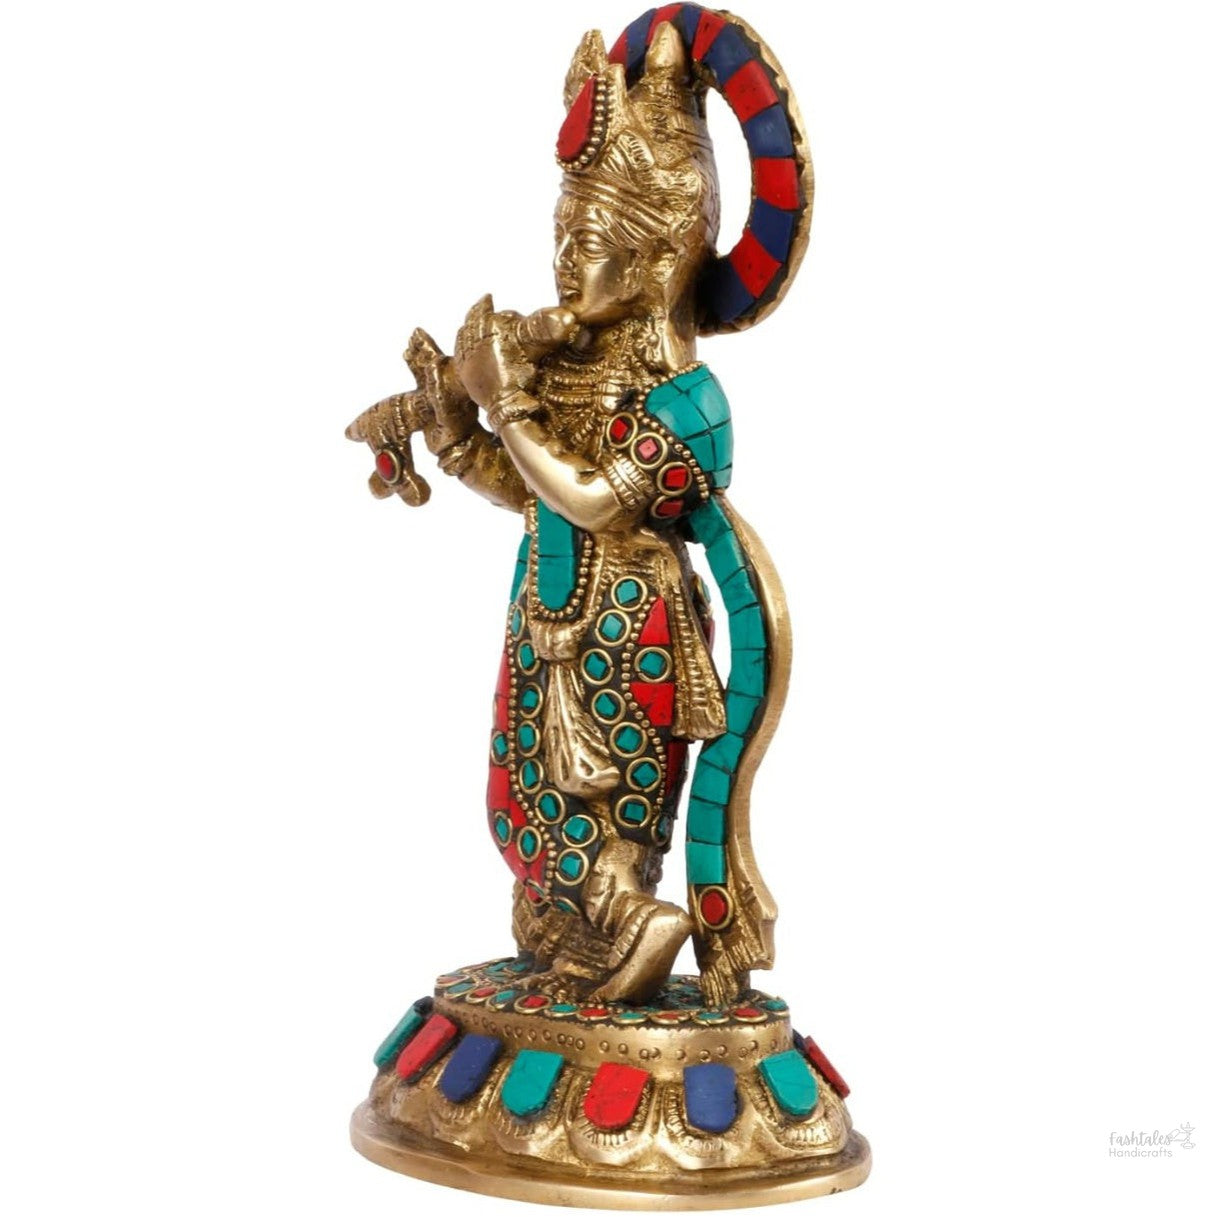 Fashtales Handicrafts Brass Krishna Idol with Flute – 8.5 Inches Height, Vibrant Stone Decoration, Ideal for Home Décor